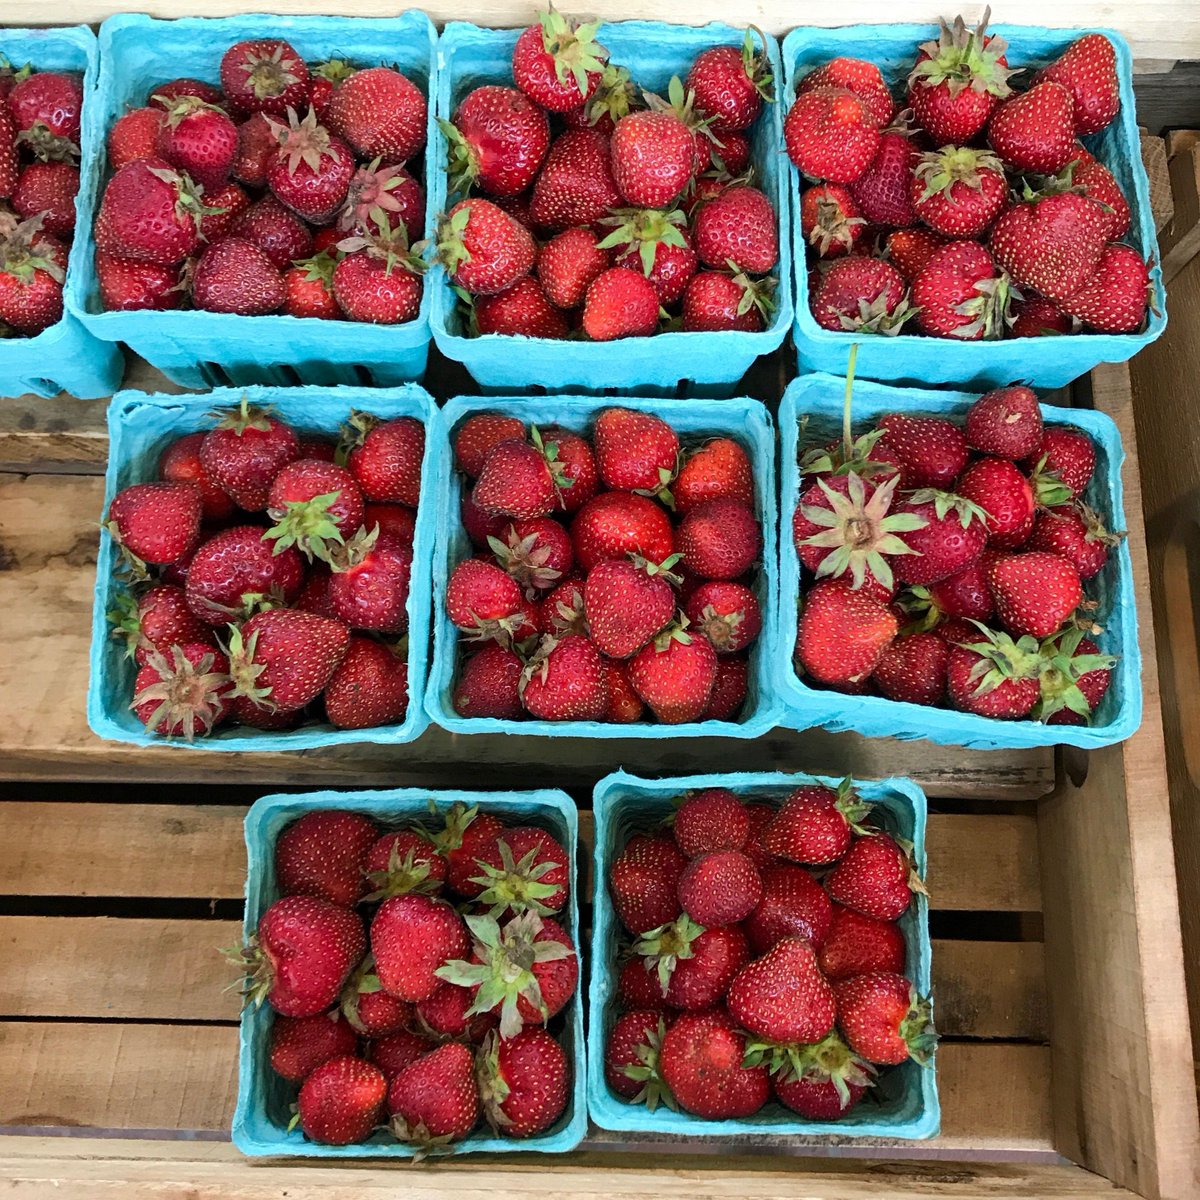 A bounty of seasonal favorites are starting to add pops of wonderful color all over the market! Join us to find your goodies for the weekend ahead -- like these gorgeous strawberries from @radishandrye! 🍓 #broadstreetmarket #seasonal #harrisburgpa #farmersmarket #shoplocal